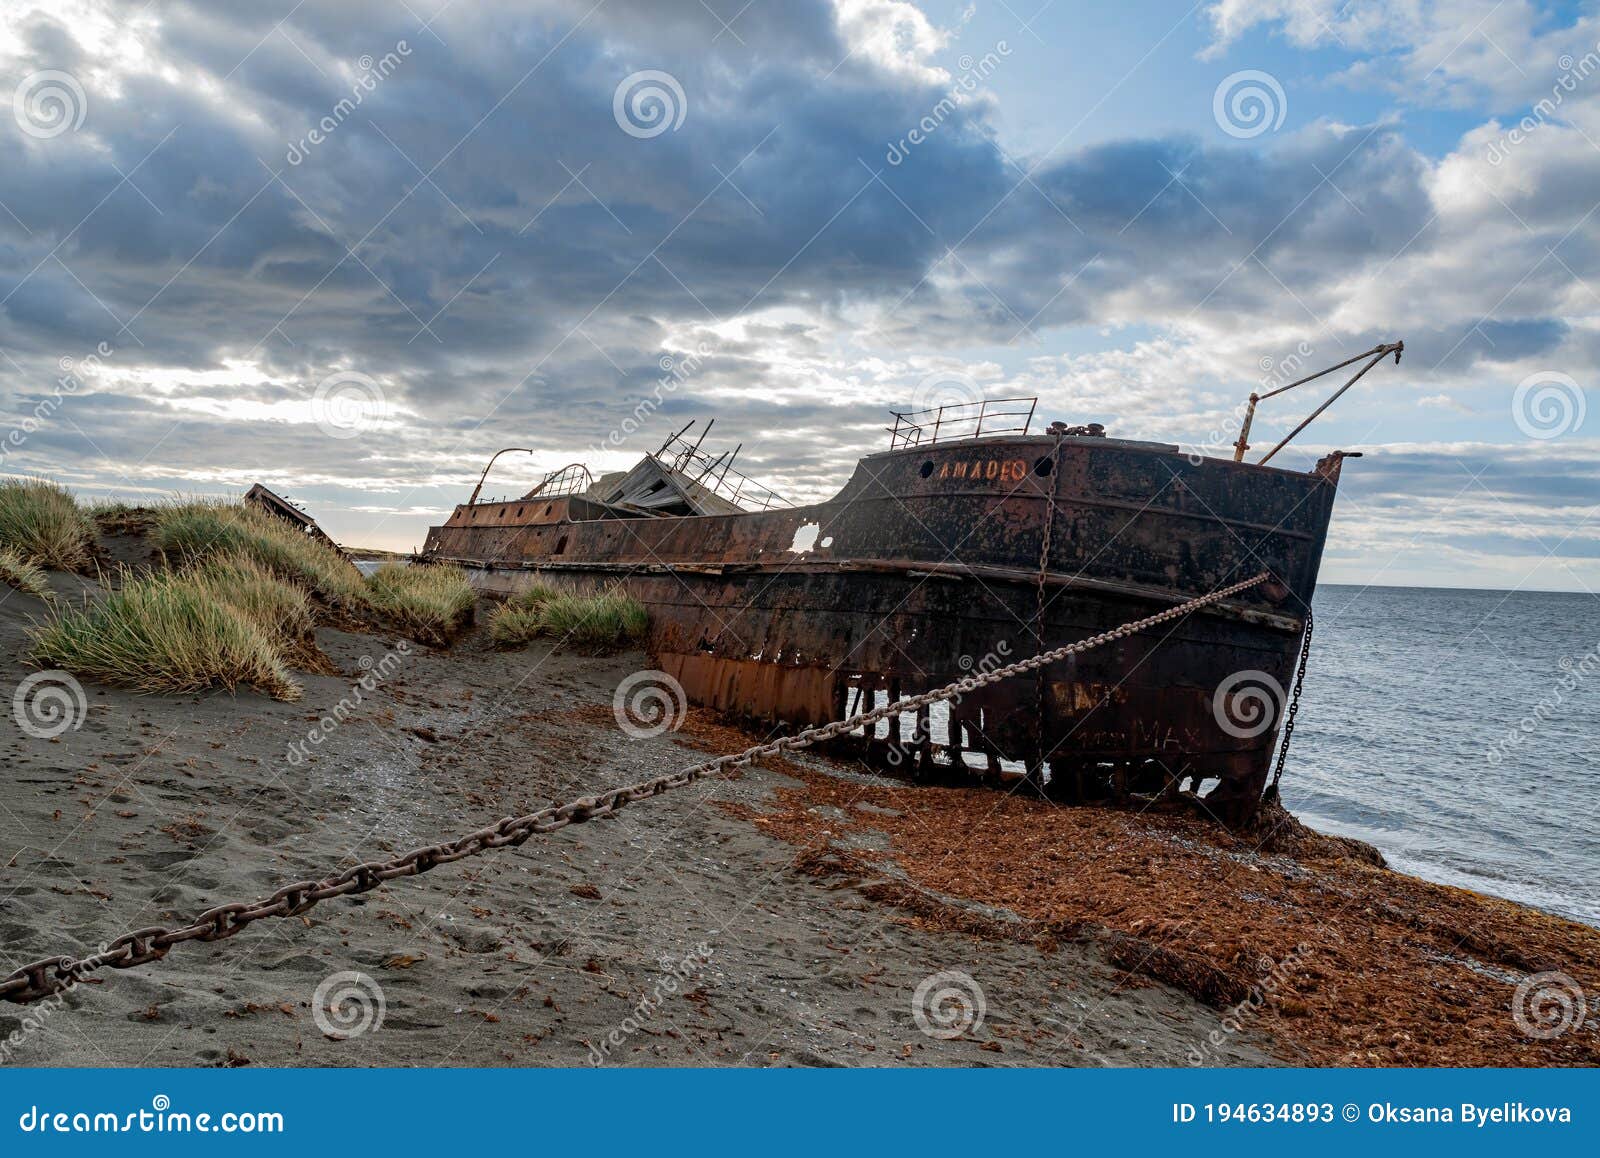 remains of the steamship amadeo at san gregorio in magellanes, southern chile